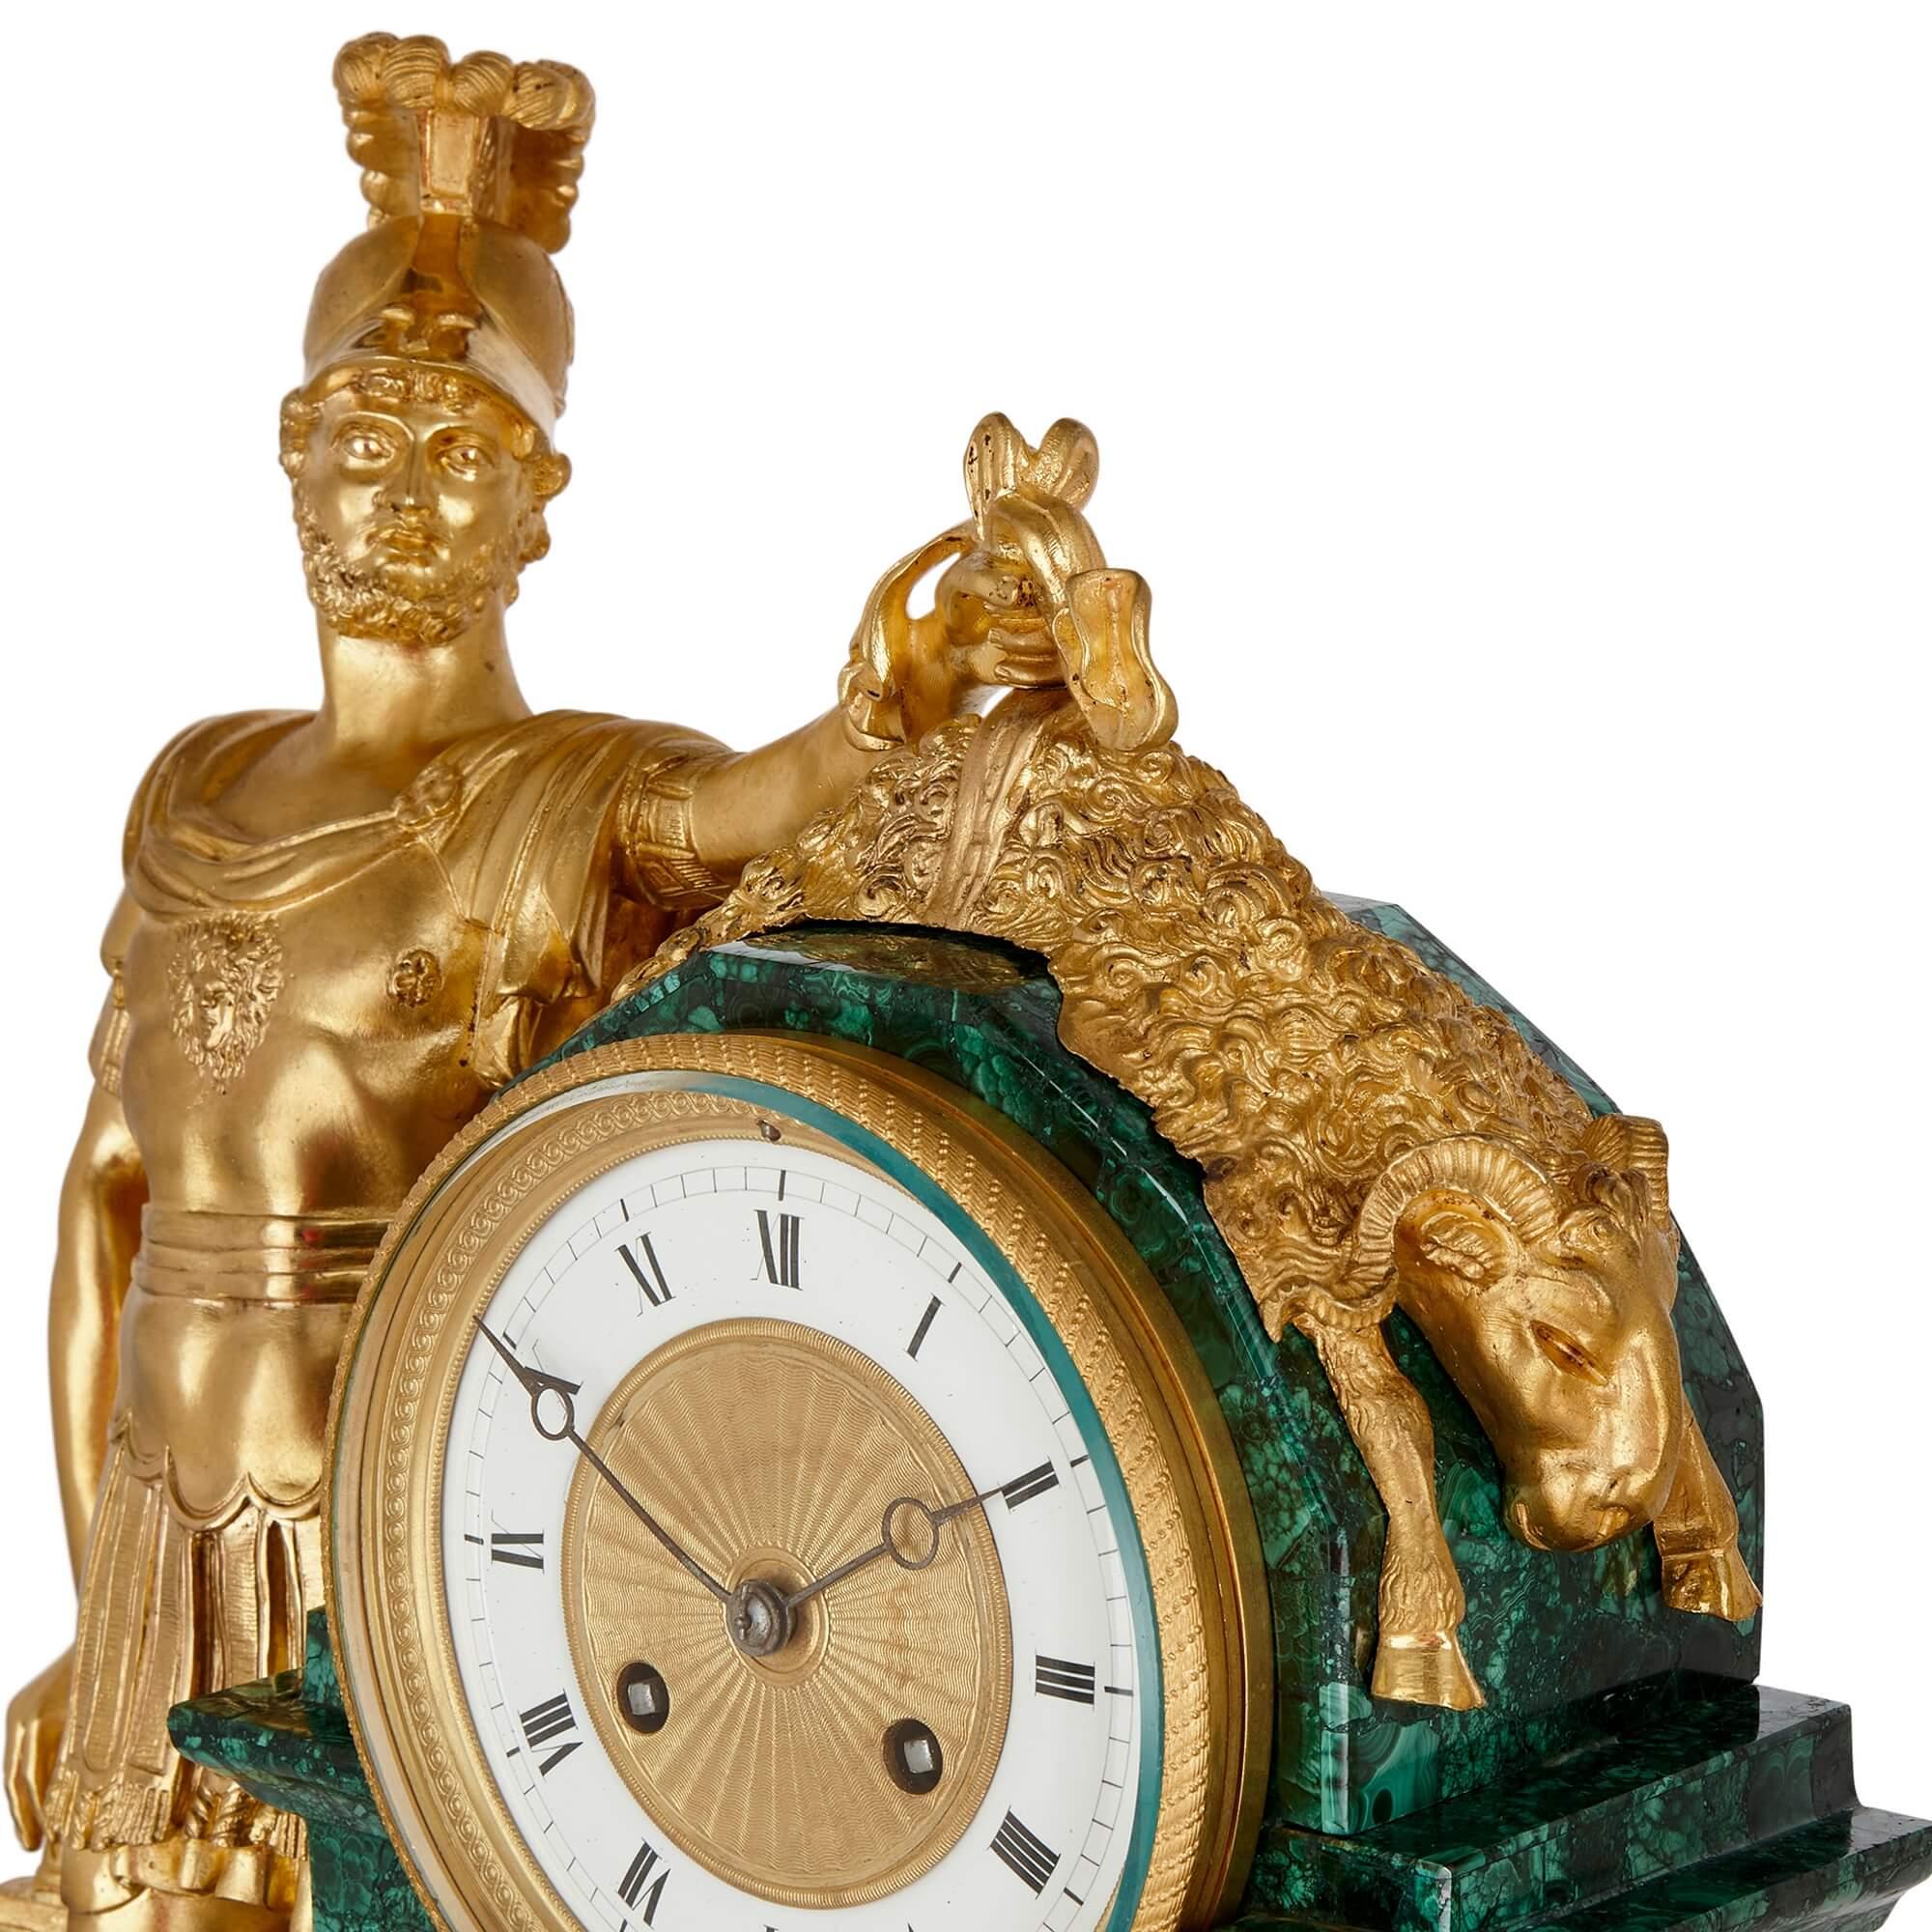 Large Empire Style Ormolu and Malachite Mantel Clock with Mythological Sculpture In Good Condition For Sale In London, GB